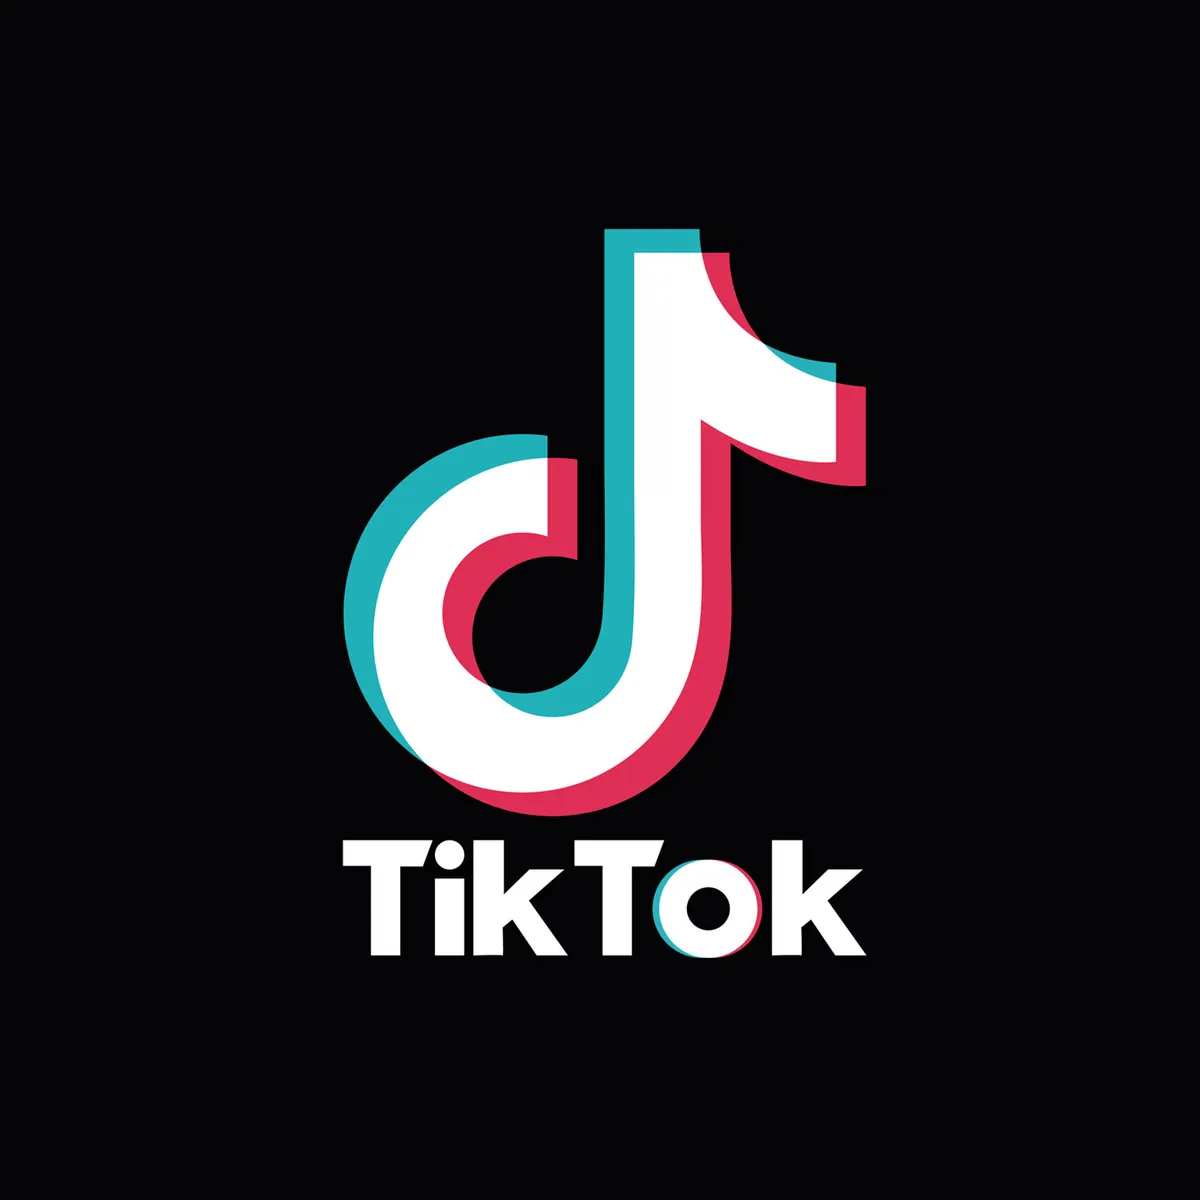 TikTok: Is it a good platform for your business?